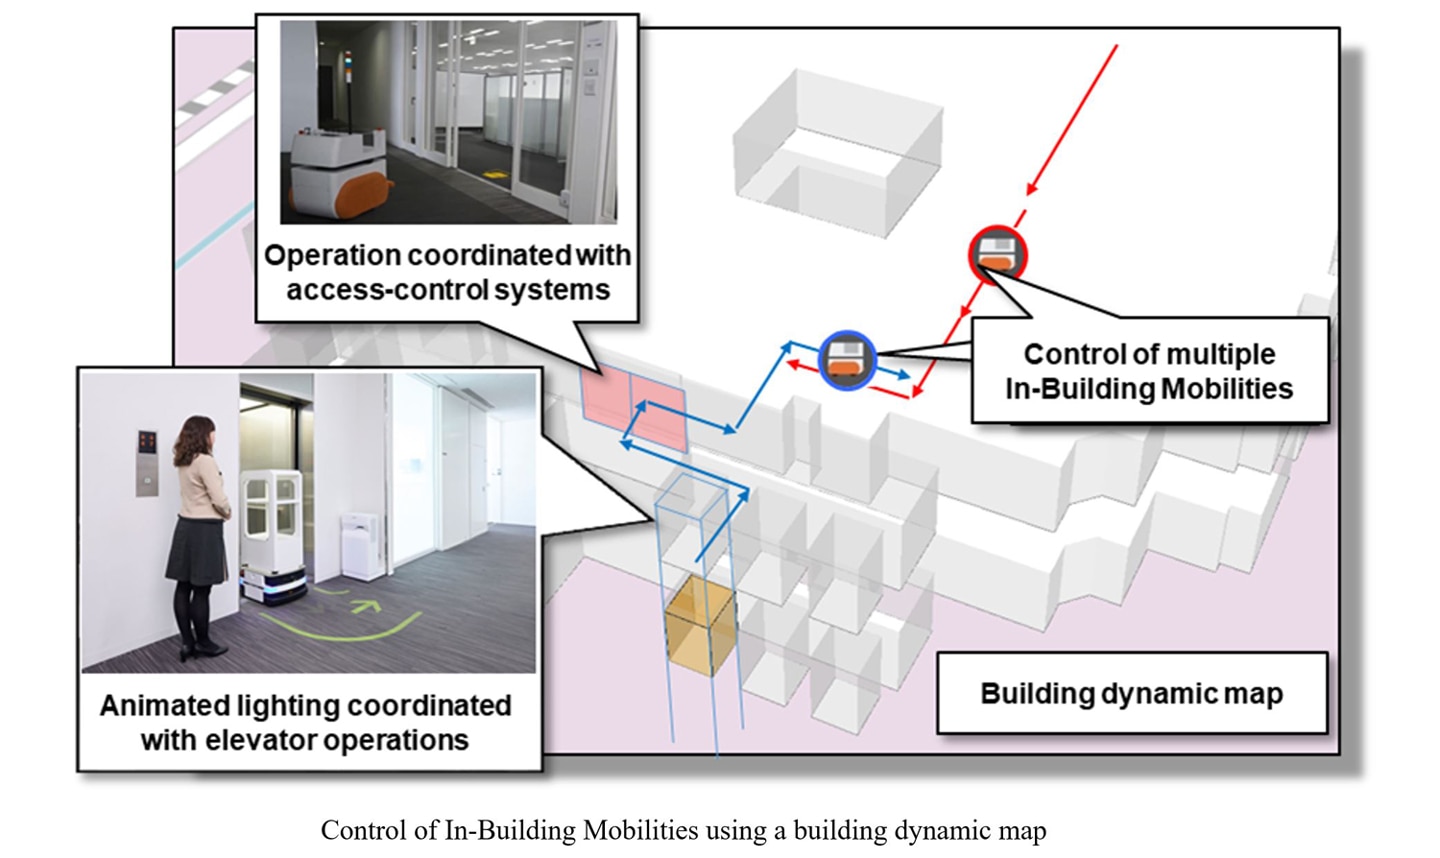 Control of In-Building Mobilities using a building dynamic map